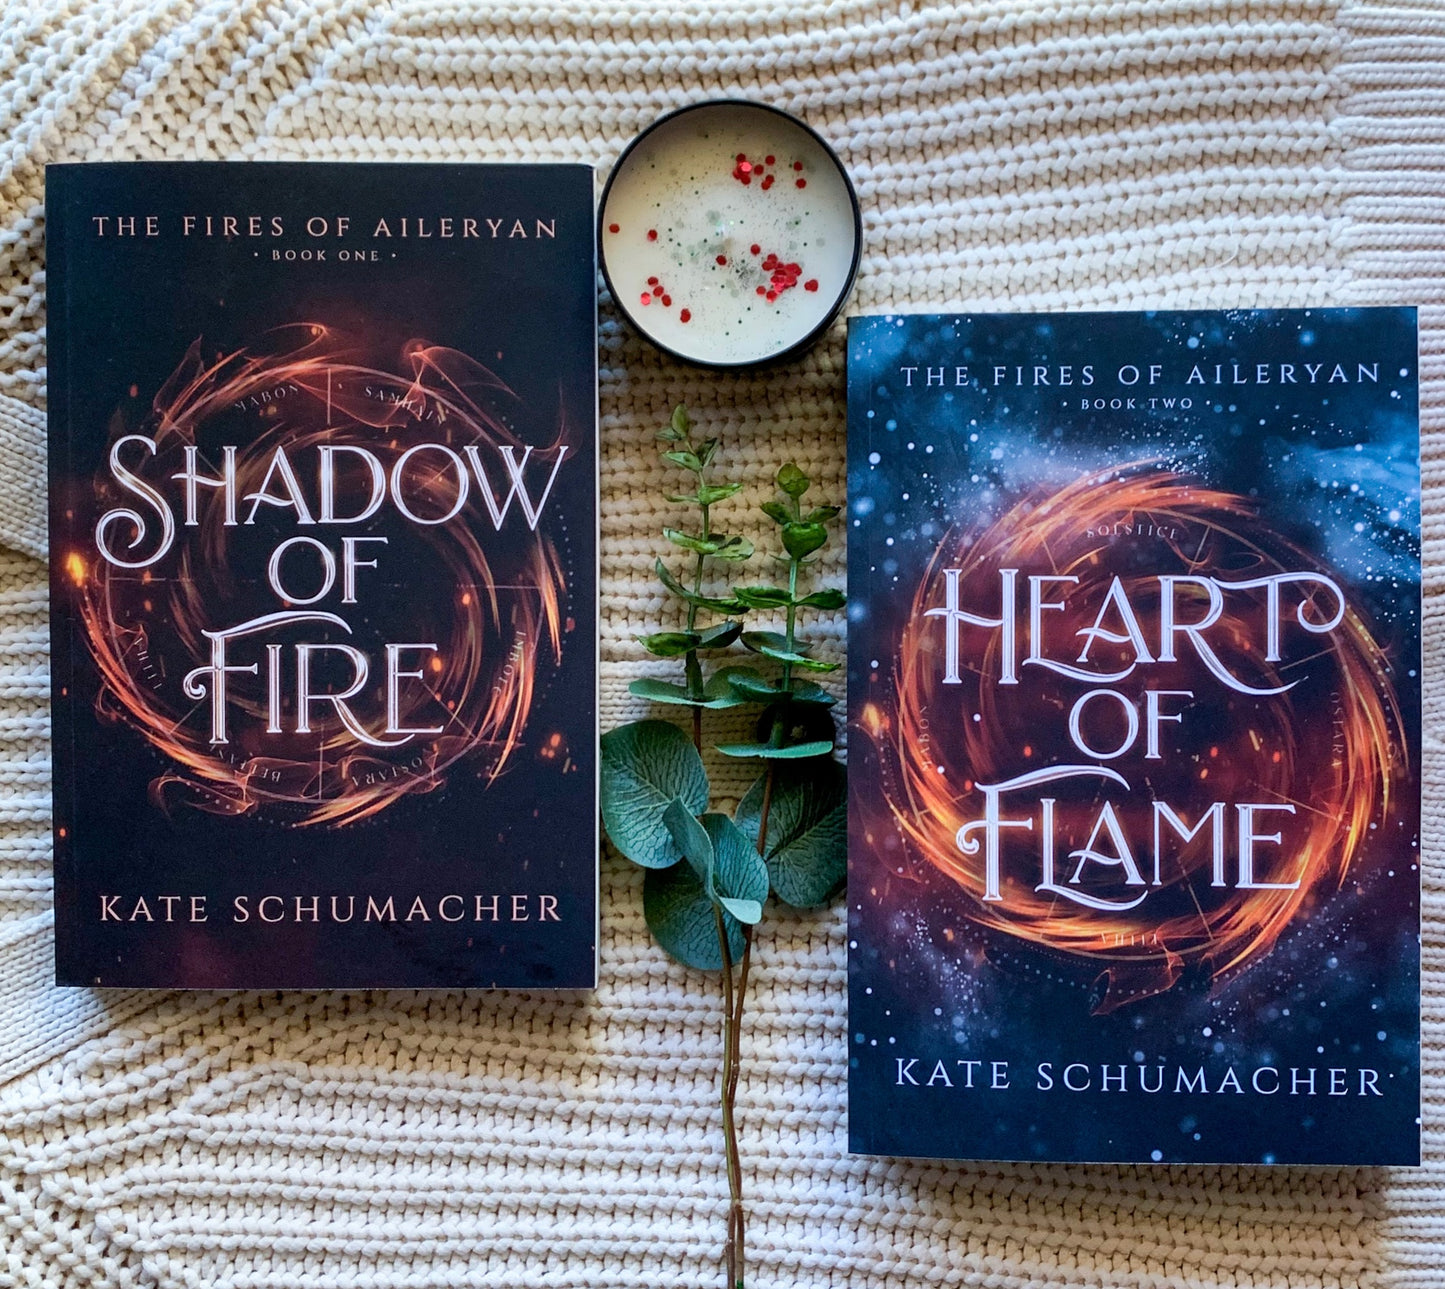 The Fires of Aileryan Series by Kate Schumacher